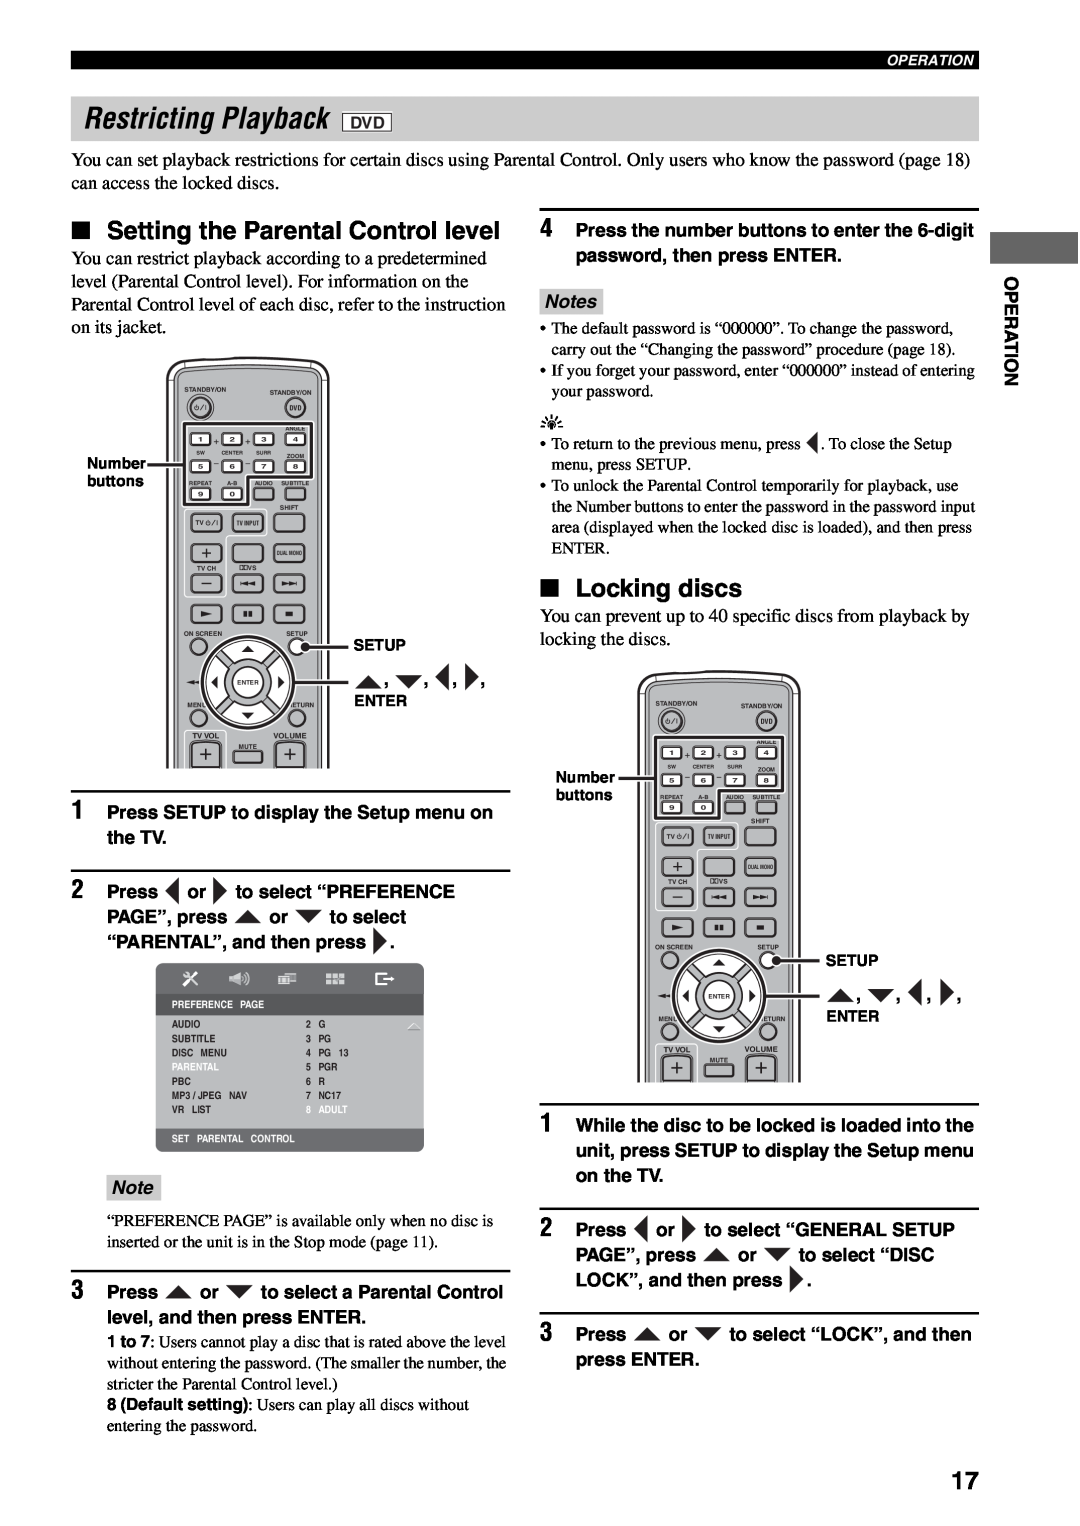 Yamaha AVX-S30 owner manual Restricting Playback DVD, Setting the Parental Control level, Locking discs, Notes 